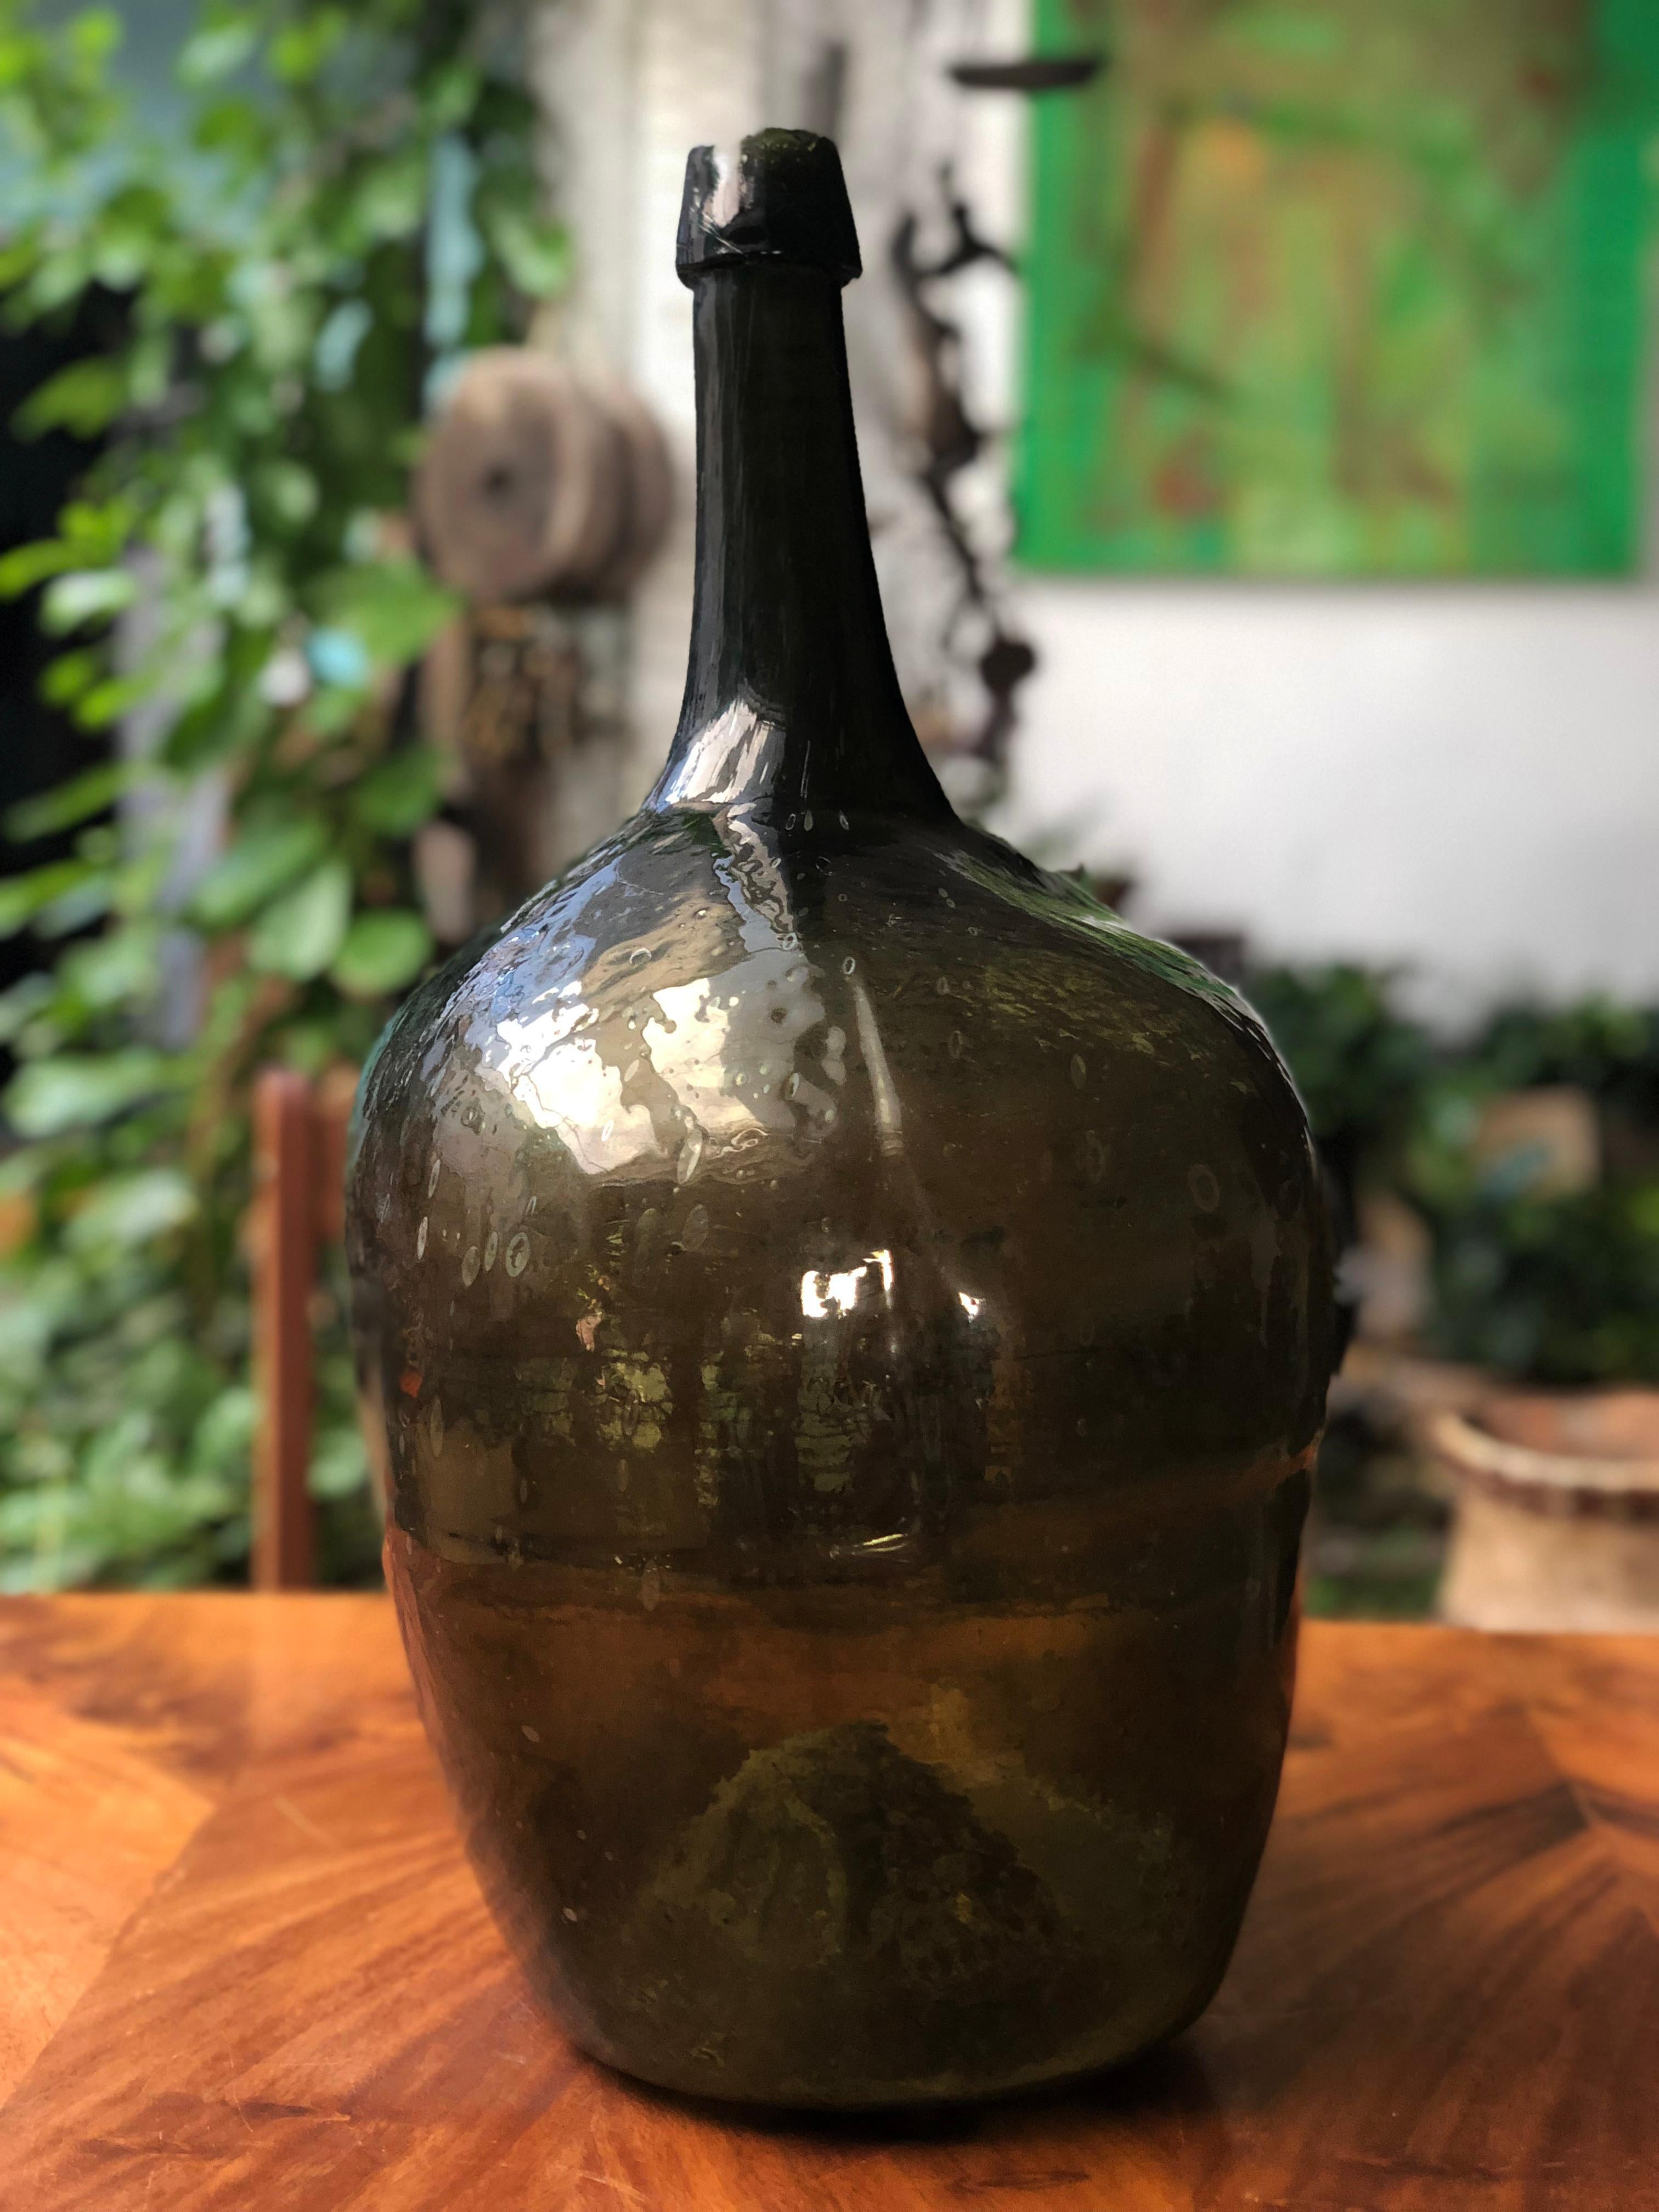 Late 19th century blown glass dark green demijohn bottle with a beautiful bold irregular sculptural form and a very deep dished pontil. Dating anywhere from the late 18th-early part of the 19th century.